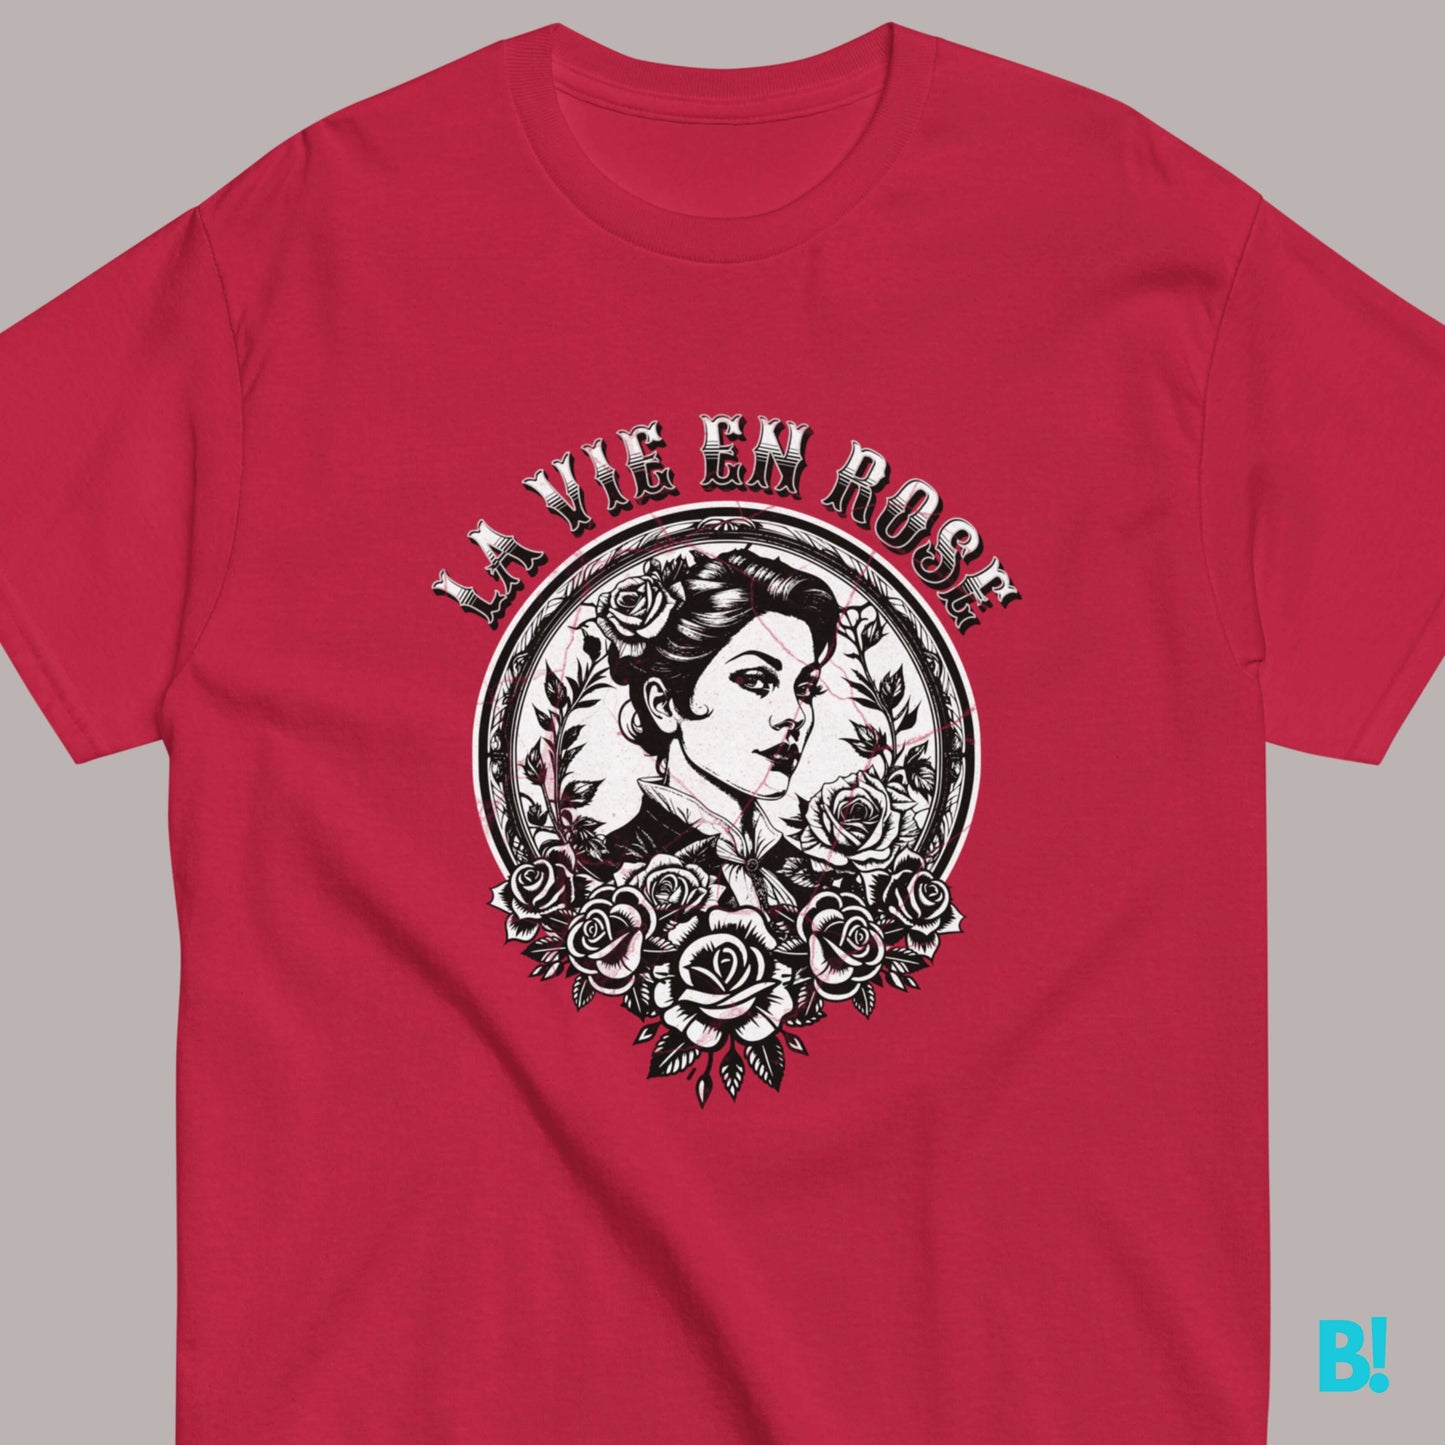 La Vie En Rose French Tattoo Retro Inspired Vintage T-Shirt Bonjour, romantics! La Vie en Rose, where every moment blooms with French romance. This enchanting tee captures the essence of Parisian elegance. Embrace the beauty of life in full bloom and pain